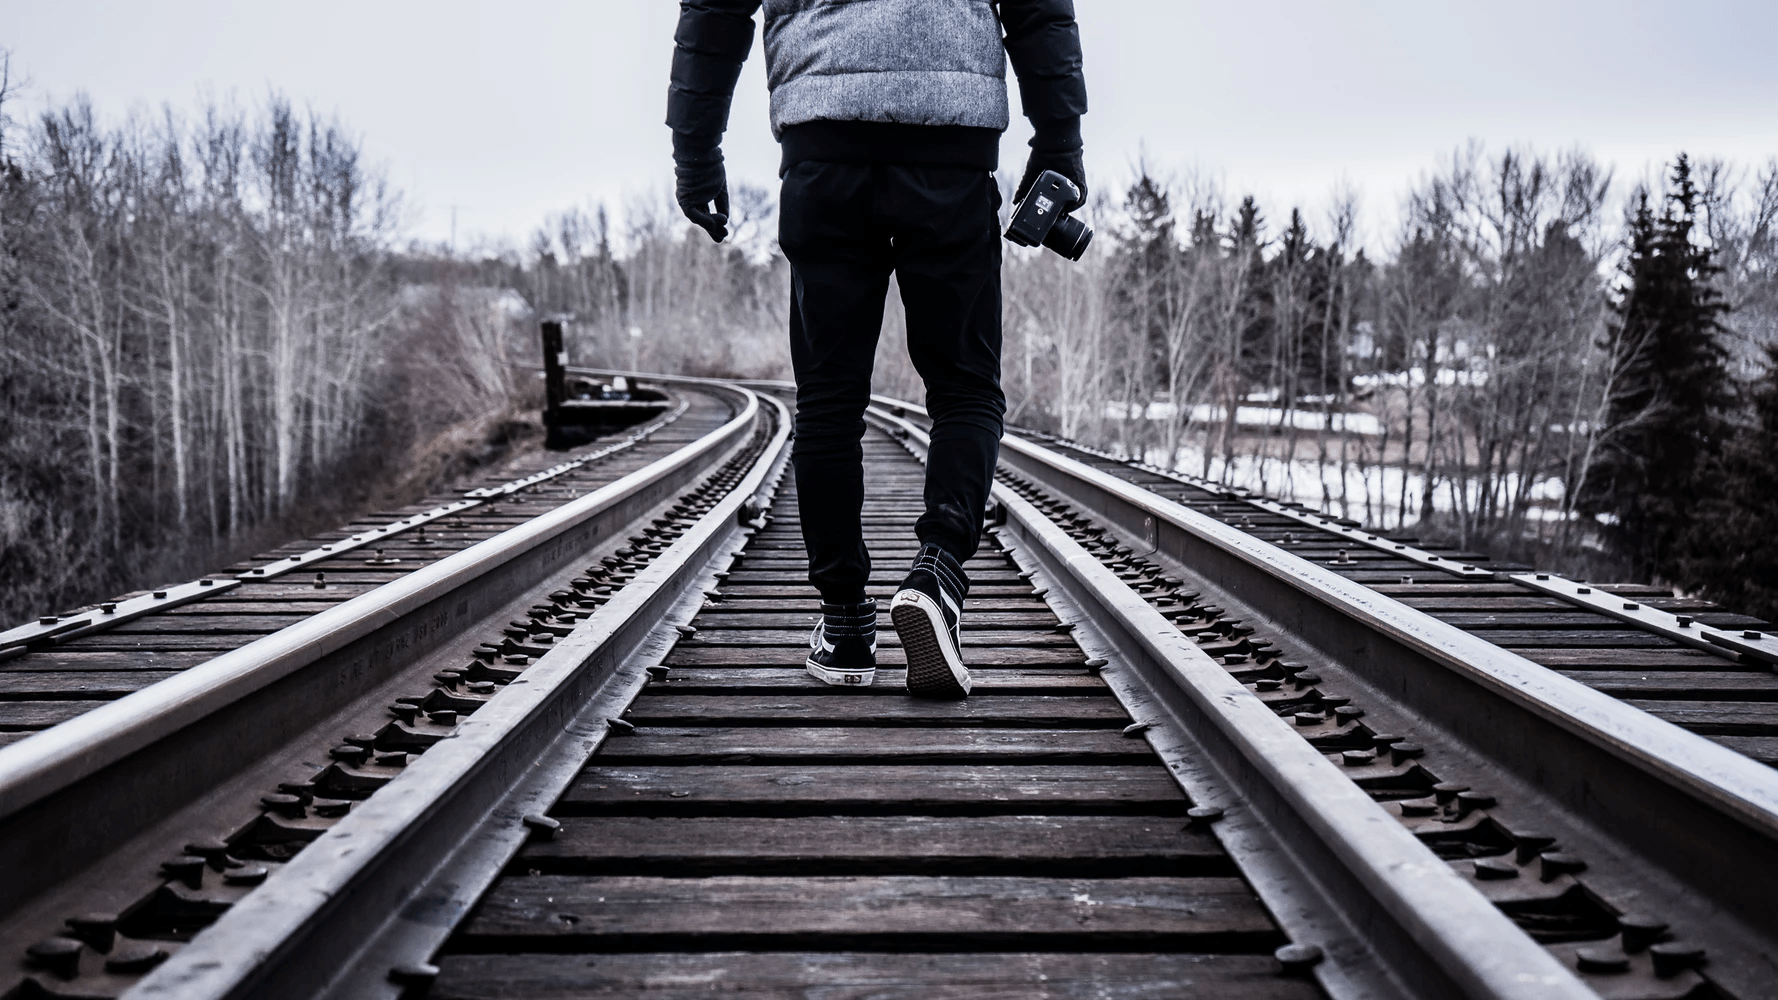 A person walking along a train track.